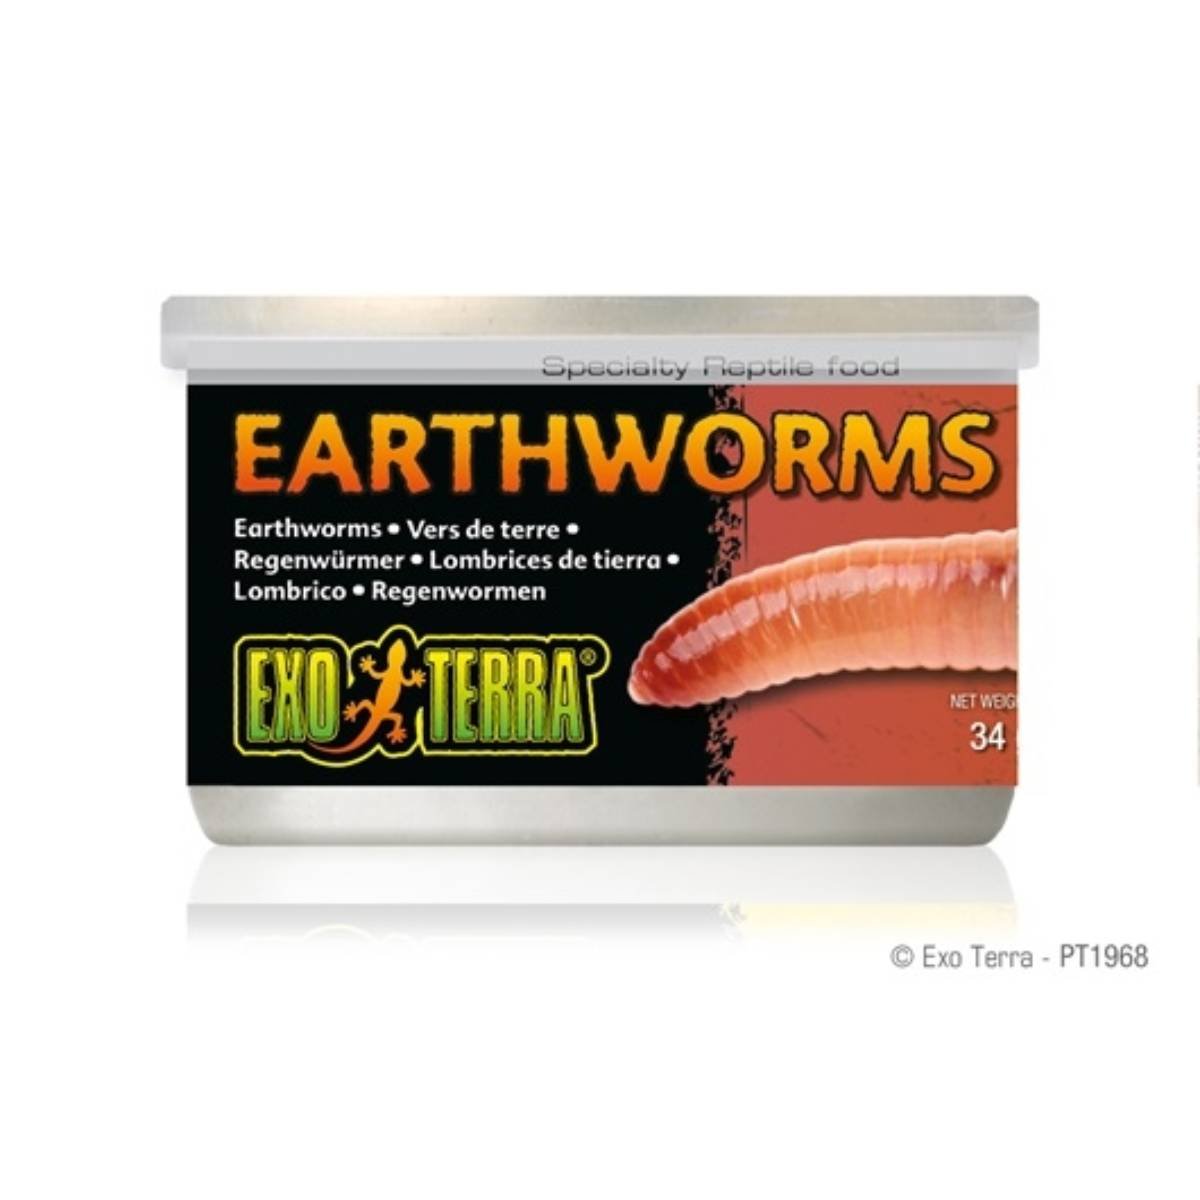 Exo Terra Canned Earthworms Specialty Reptile Food - 1.2 oz